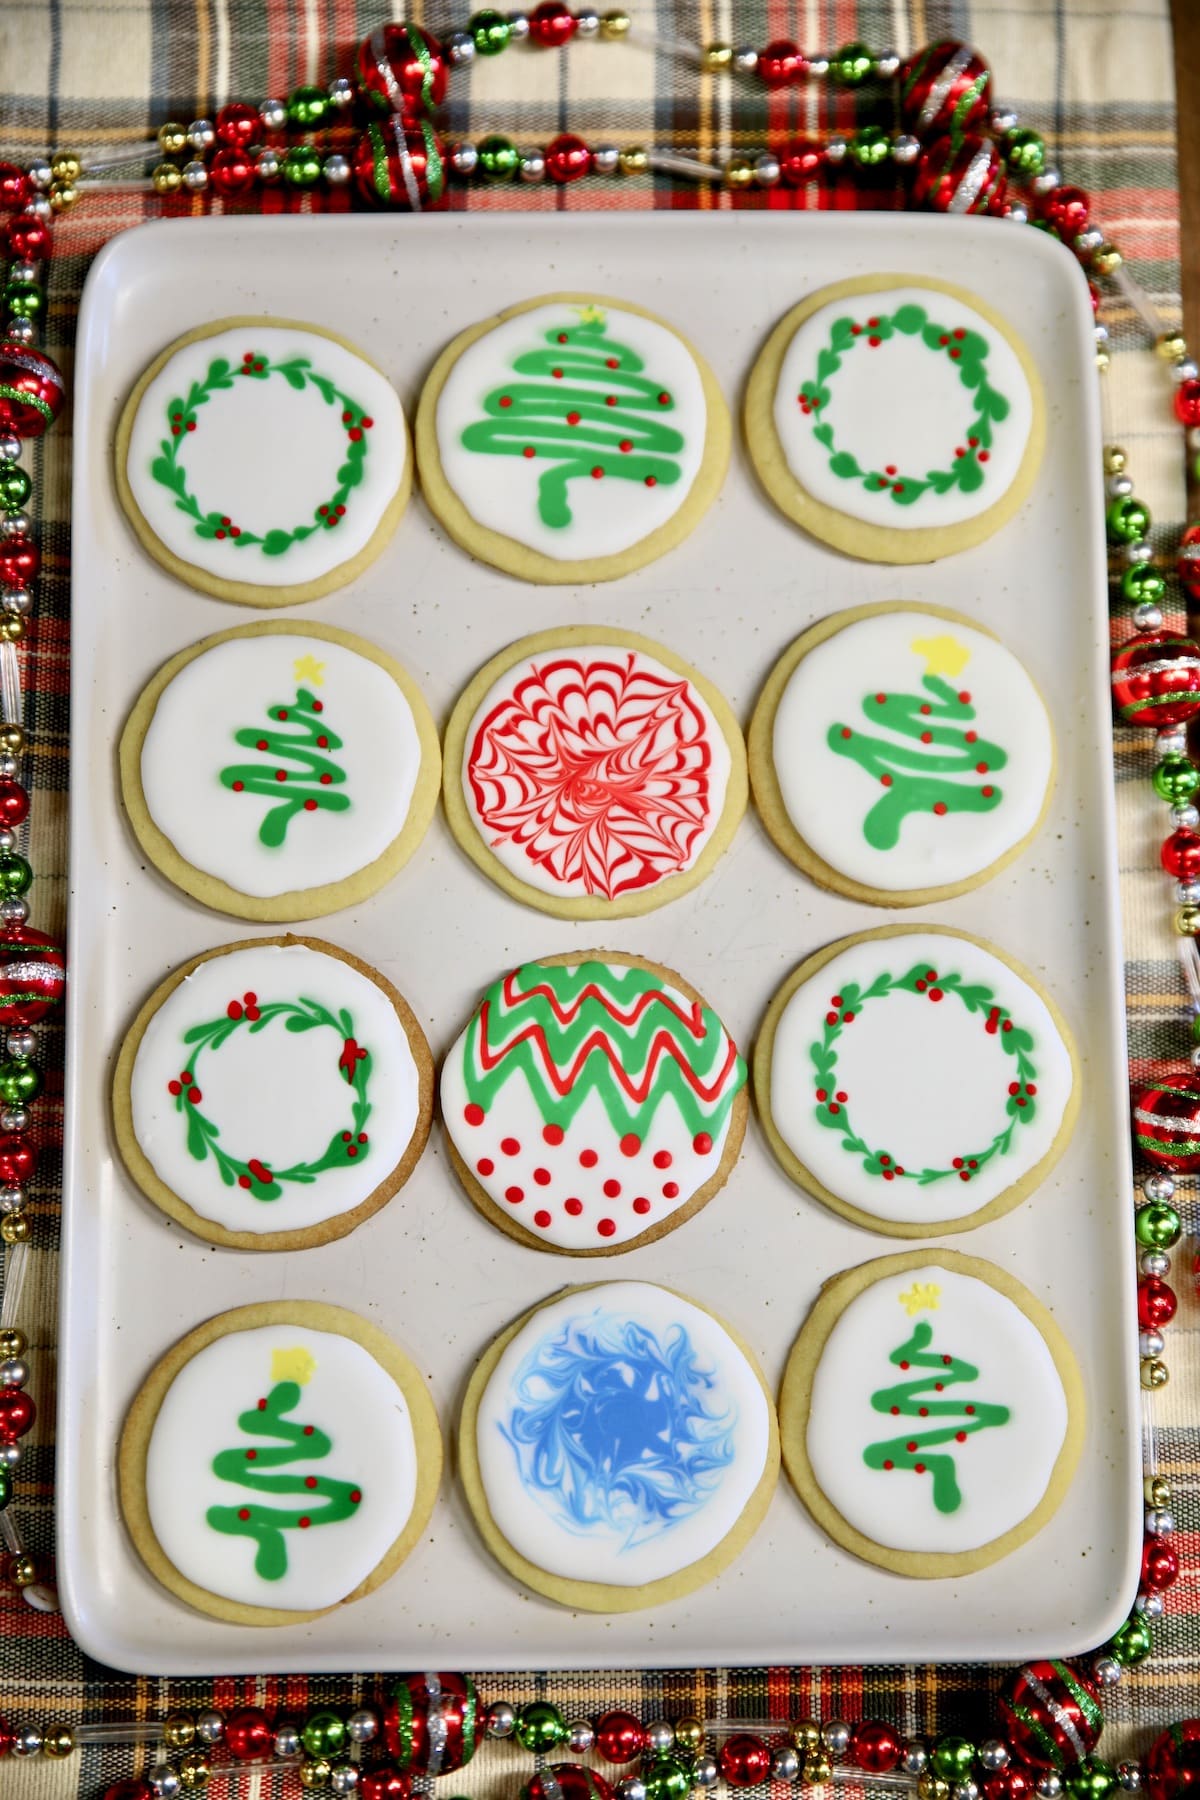 Sugar cookies with decorated royal icing.